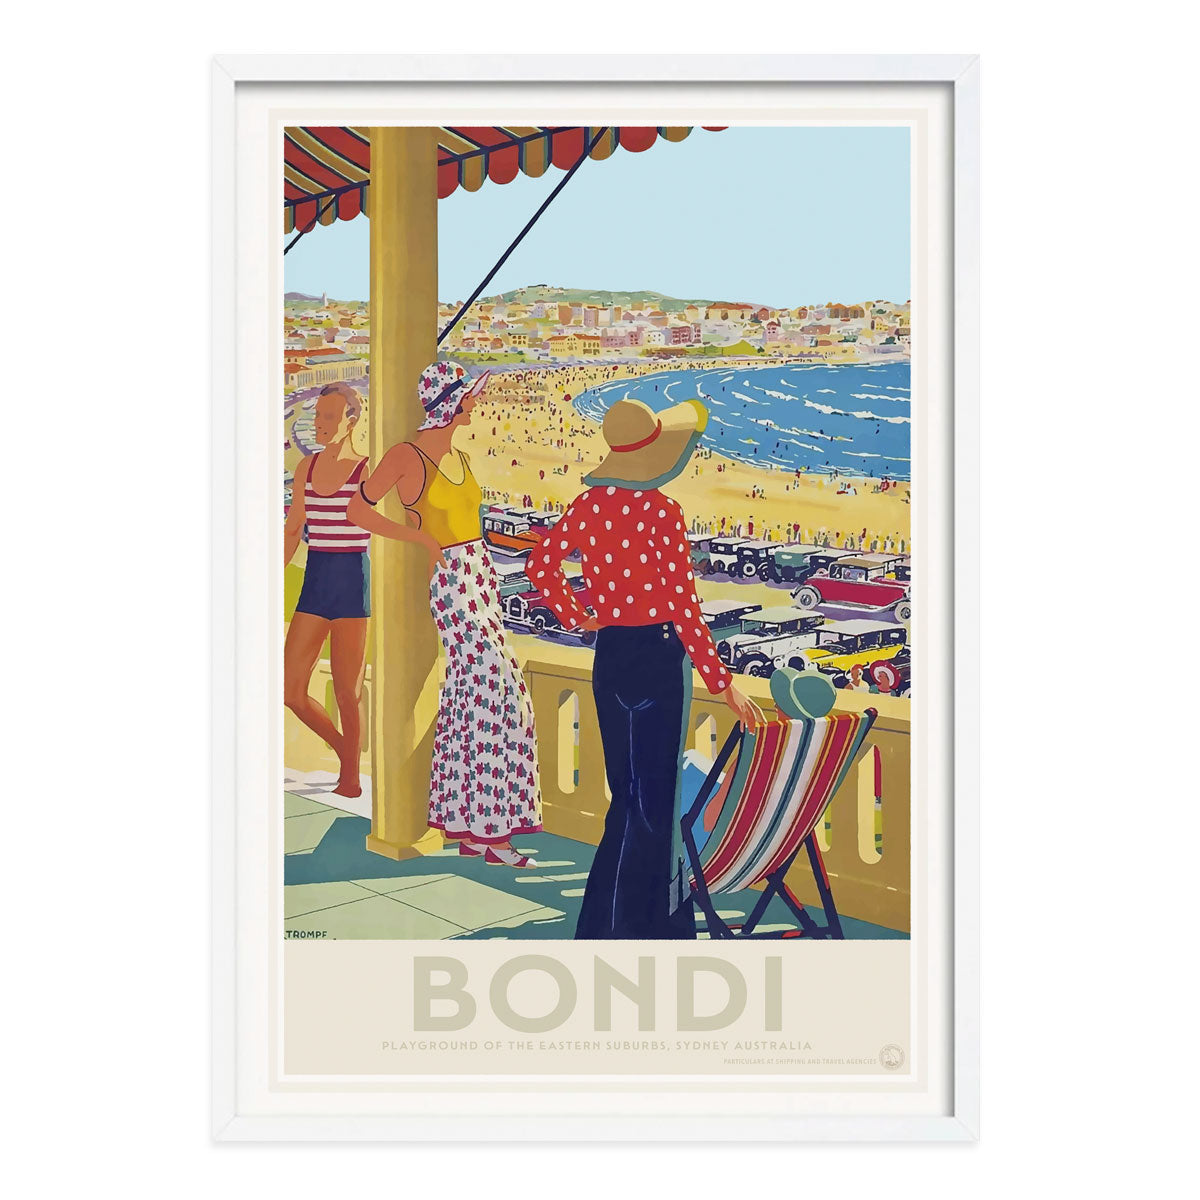 Bondi Sydney vintage advertising poster in white frame from Places We Luv